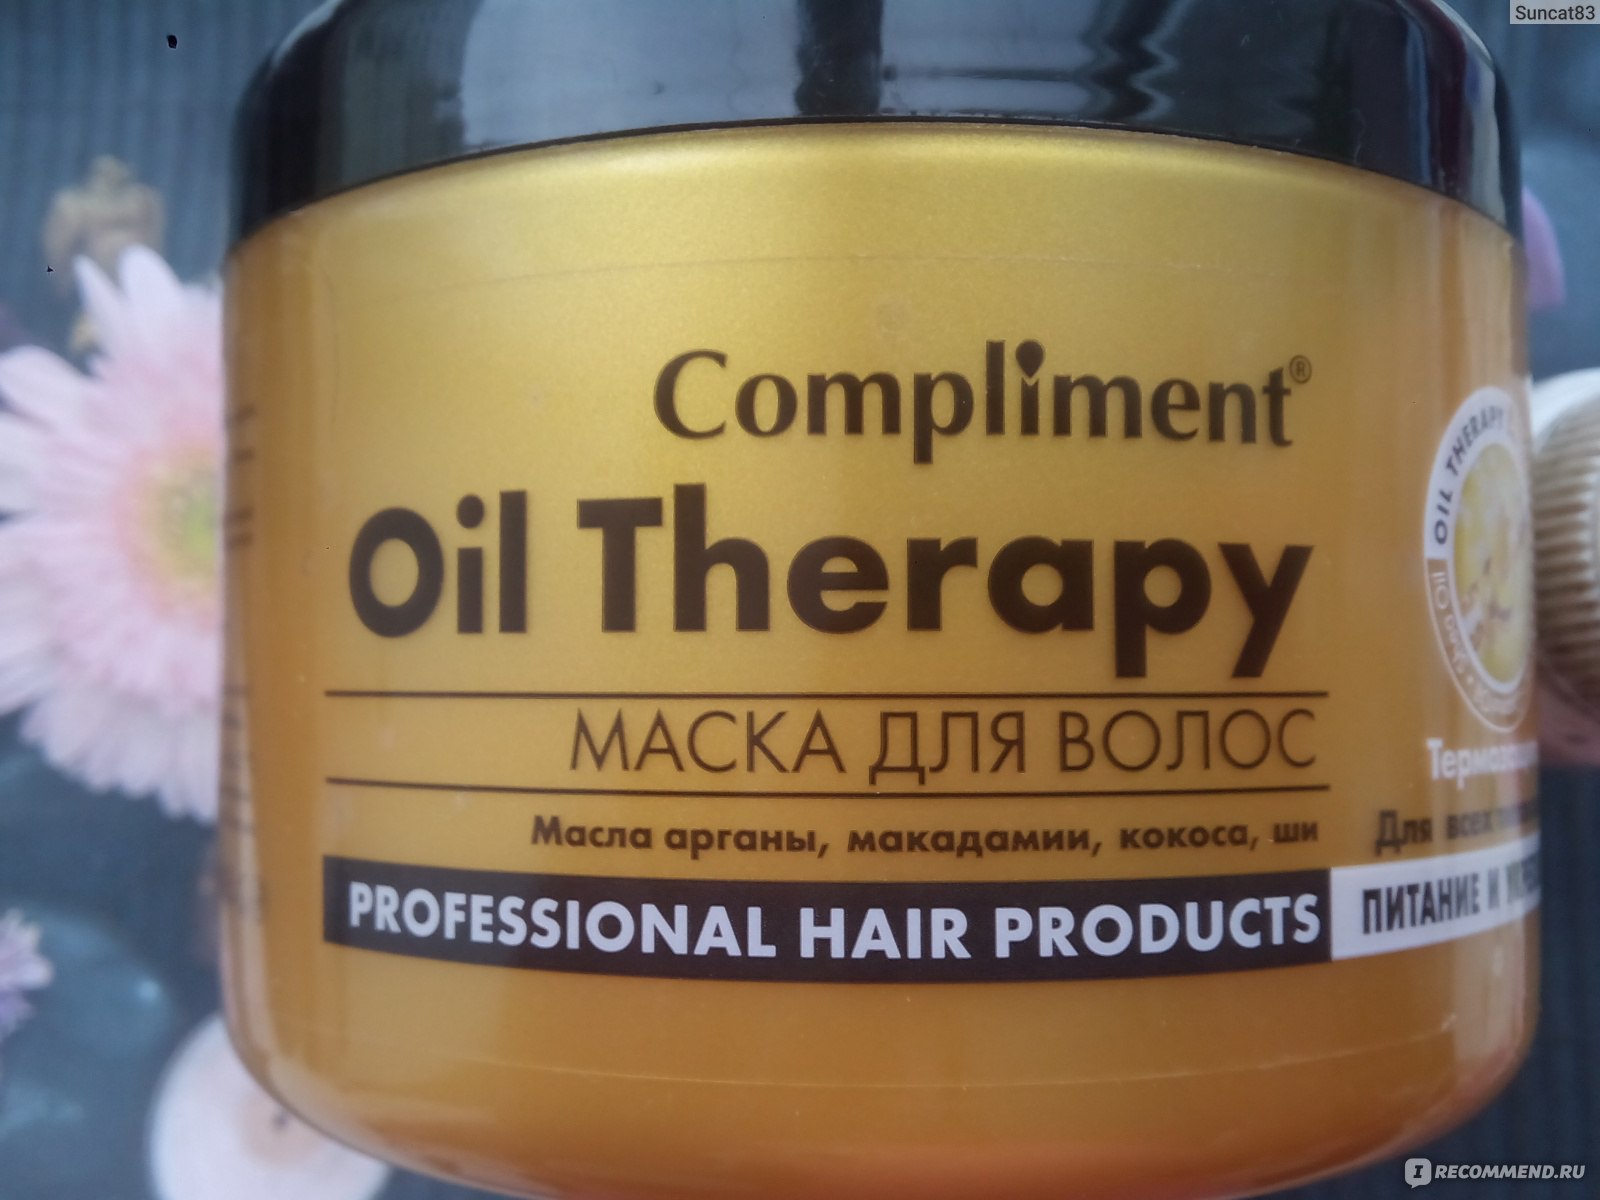 Therapy масло для волос. Маска Oil Therapy от compliment. Compliment маска для волос «Oil Therapy». Oil Therapy compliment маска состав. Compliment Oil Therapy c маслом арганы.